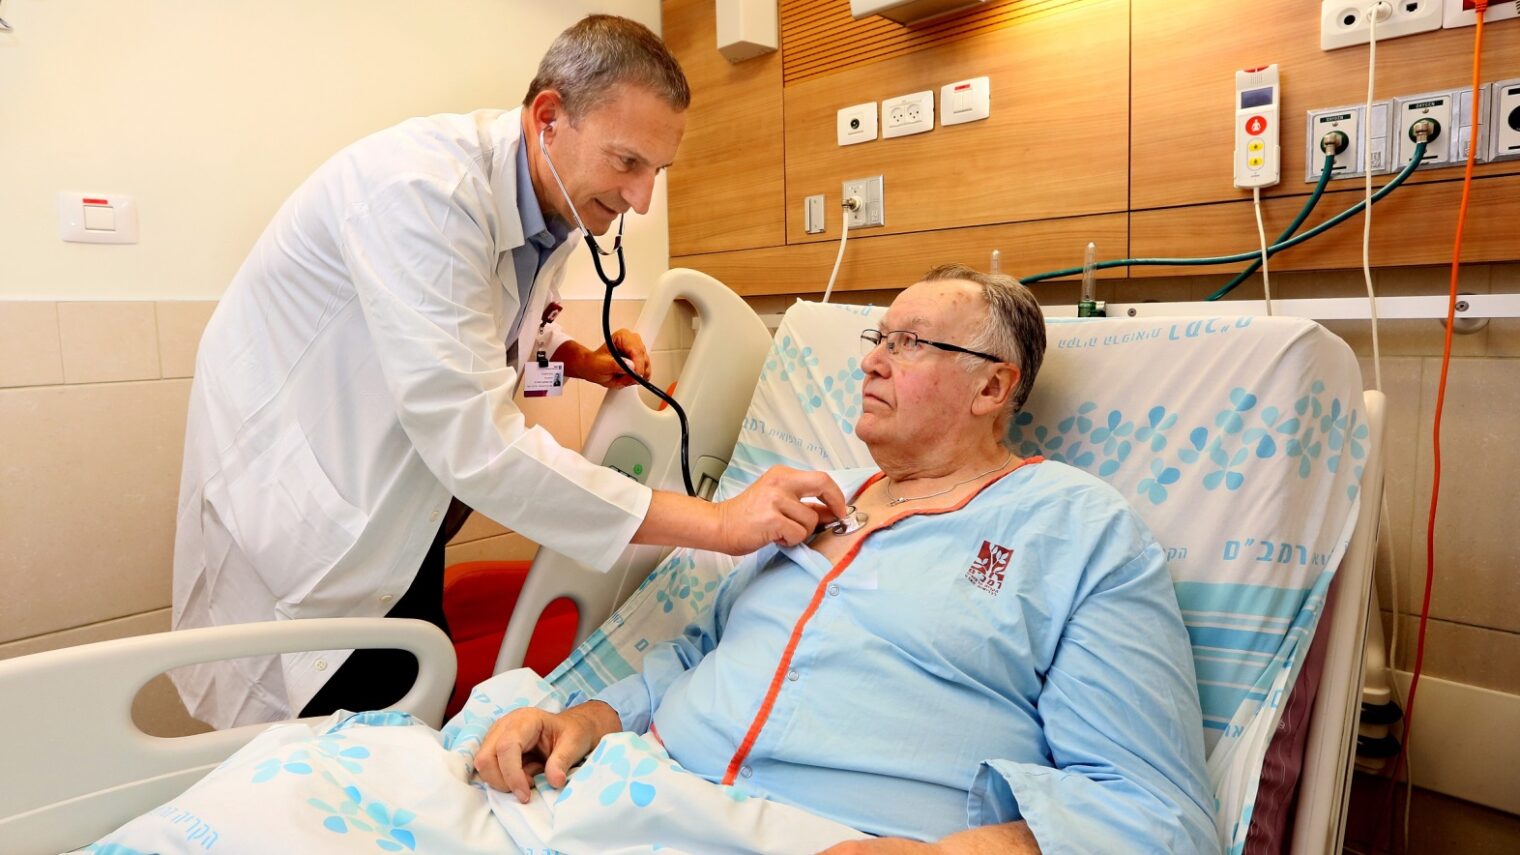 Cardiologist Gil Bolotin checking patient Robert MacLachlan, the first in the world to receive the CORolla implant, at Rambam Health Care Campus, Haifa. Photo by Pioter Fliter/RHCC